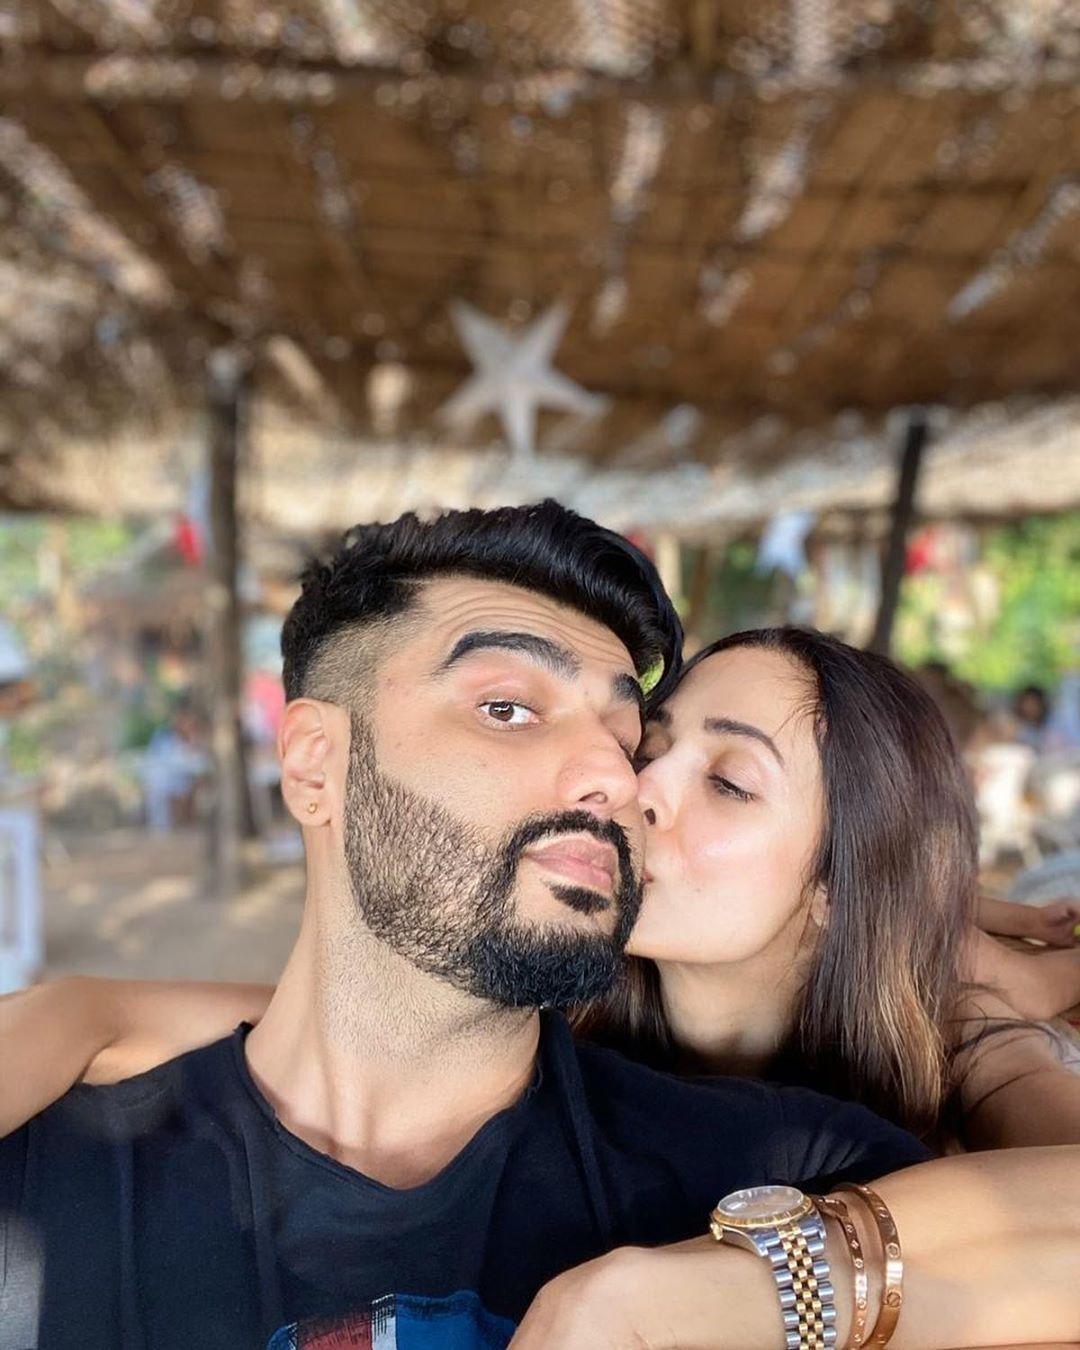 Malaika Arora's New Year Post With Arjun Kapoor Gets Bashed, Troll Asks Actor 'Didn't Learn A Thing From Vivek Oberoi Right?'